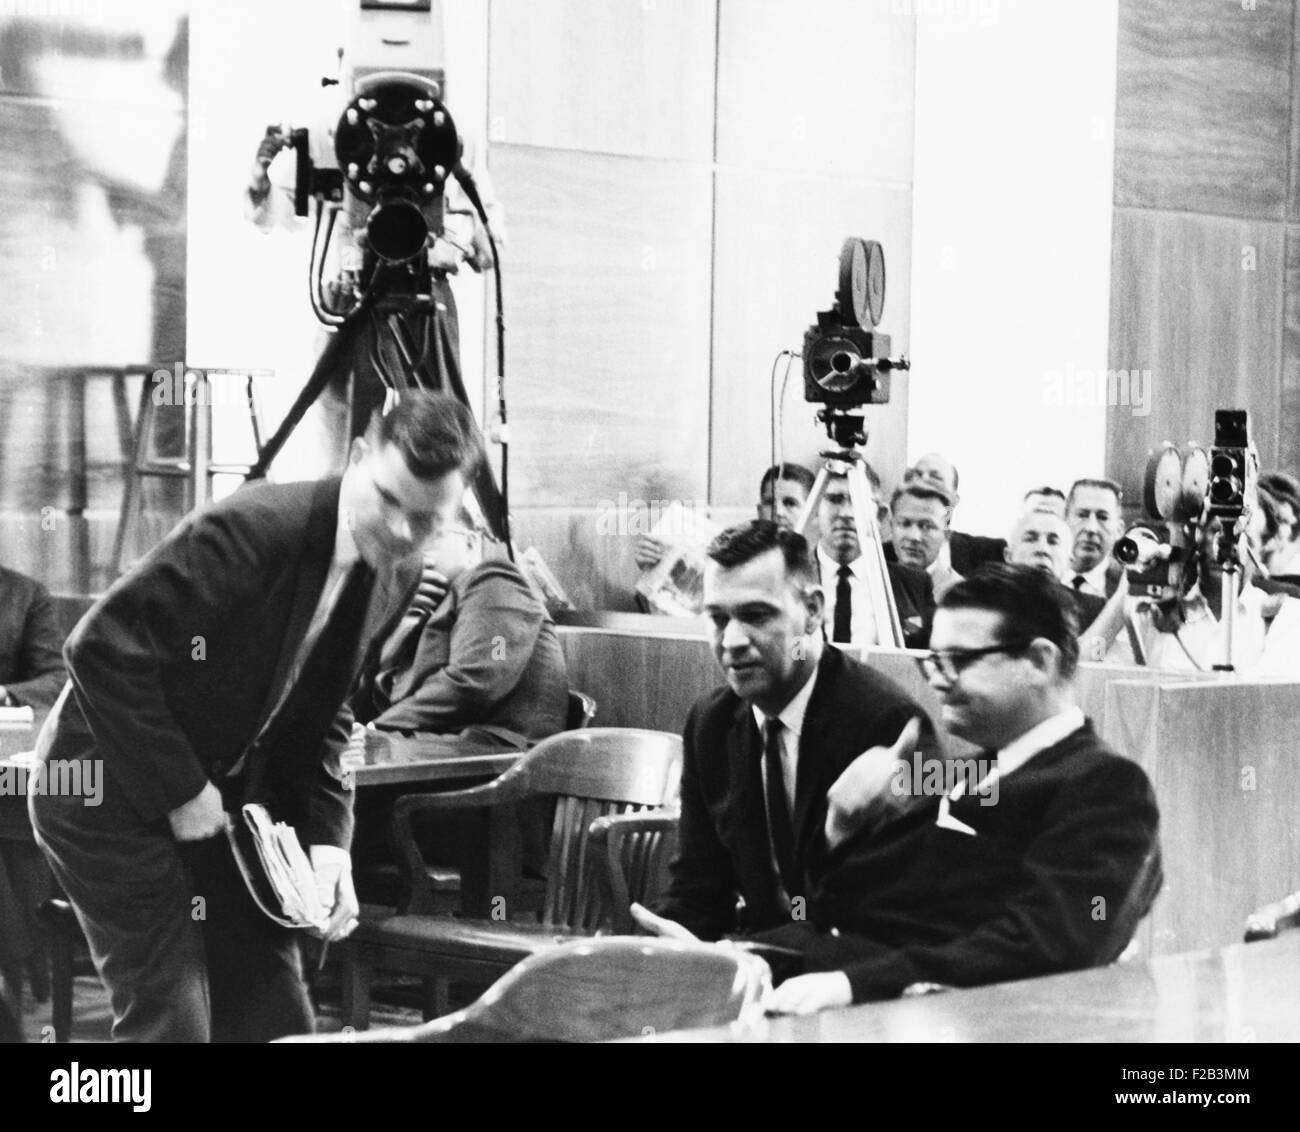 Billie Sol Estes sits at right as television cameras record the proceedings of his 1962 trial. On June 7, 1965, the Supreme Court reversed Estes conviction because parts of his state trial were televised. The court divided 5-4 on the question of reversal. Photo shows Texas financier Billy Sol Estes (foreground) sitting in court during his 1962 trial for fraud on Sept. 24, 1962. He later argued that camera coverage of the trial deprived him of due process. The U.S. Supreme Court agreed, and overturned the conviction. - (CSU 2015 5 58) Stock Photo